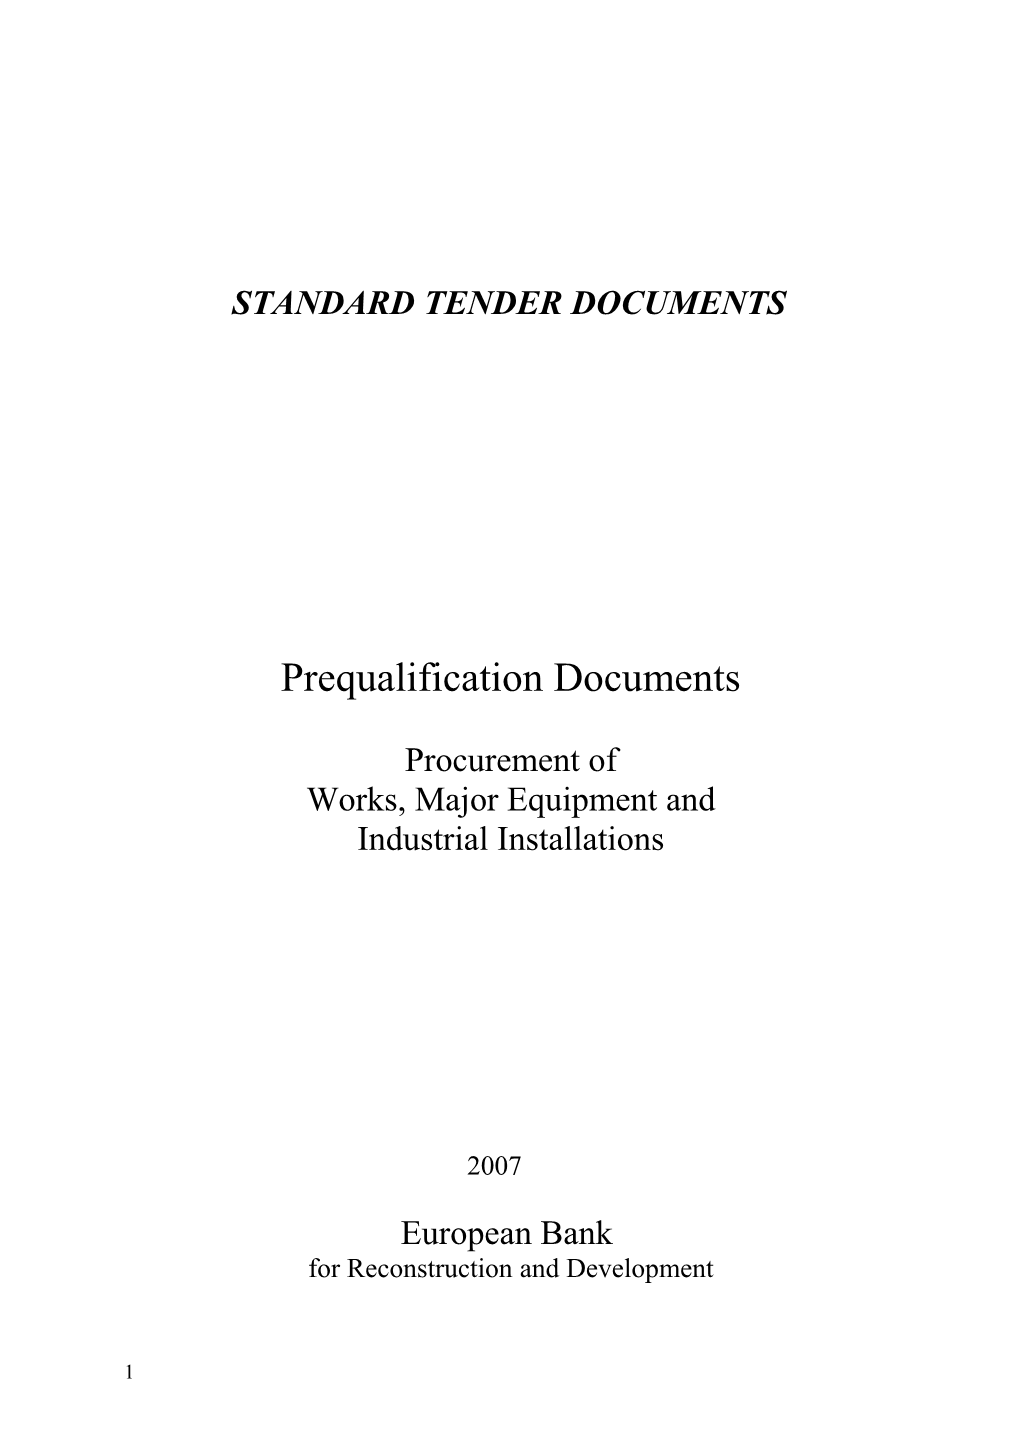 Prequalification Documents for Works, Major Equipment and Industrial Installations EBRD